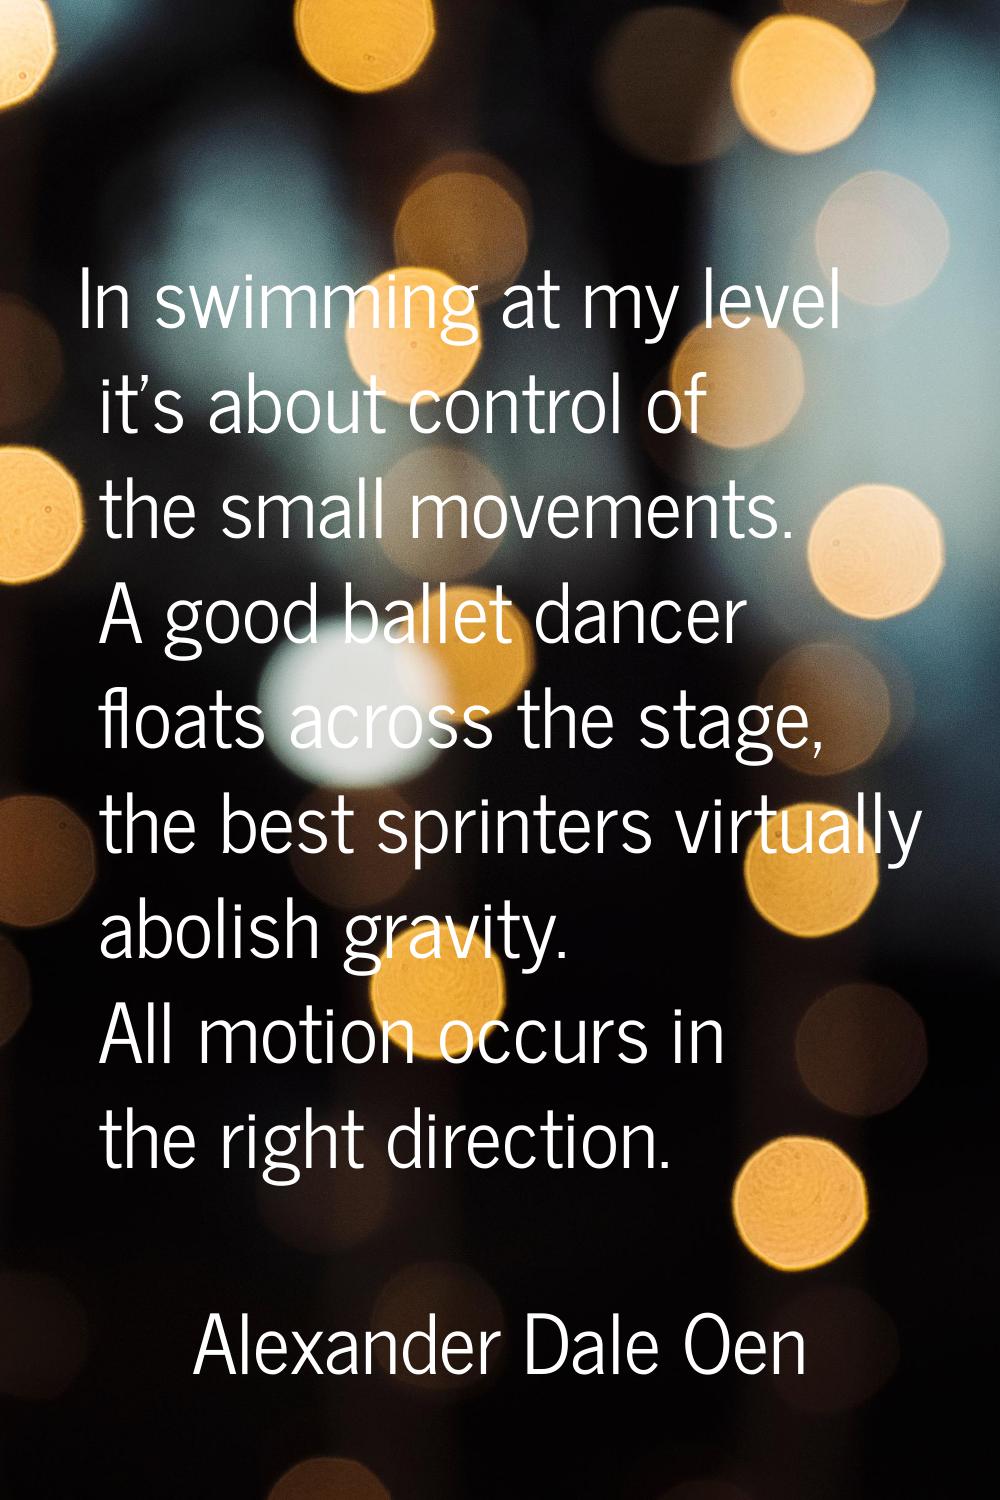 In swimming at my level it's about control of the small movements. A good ballet dancer floats acro